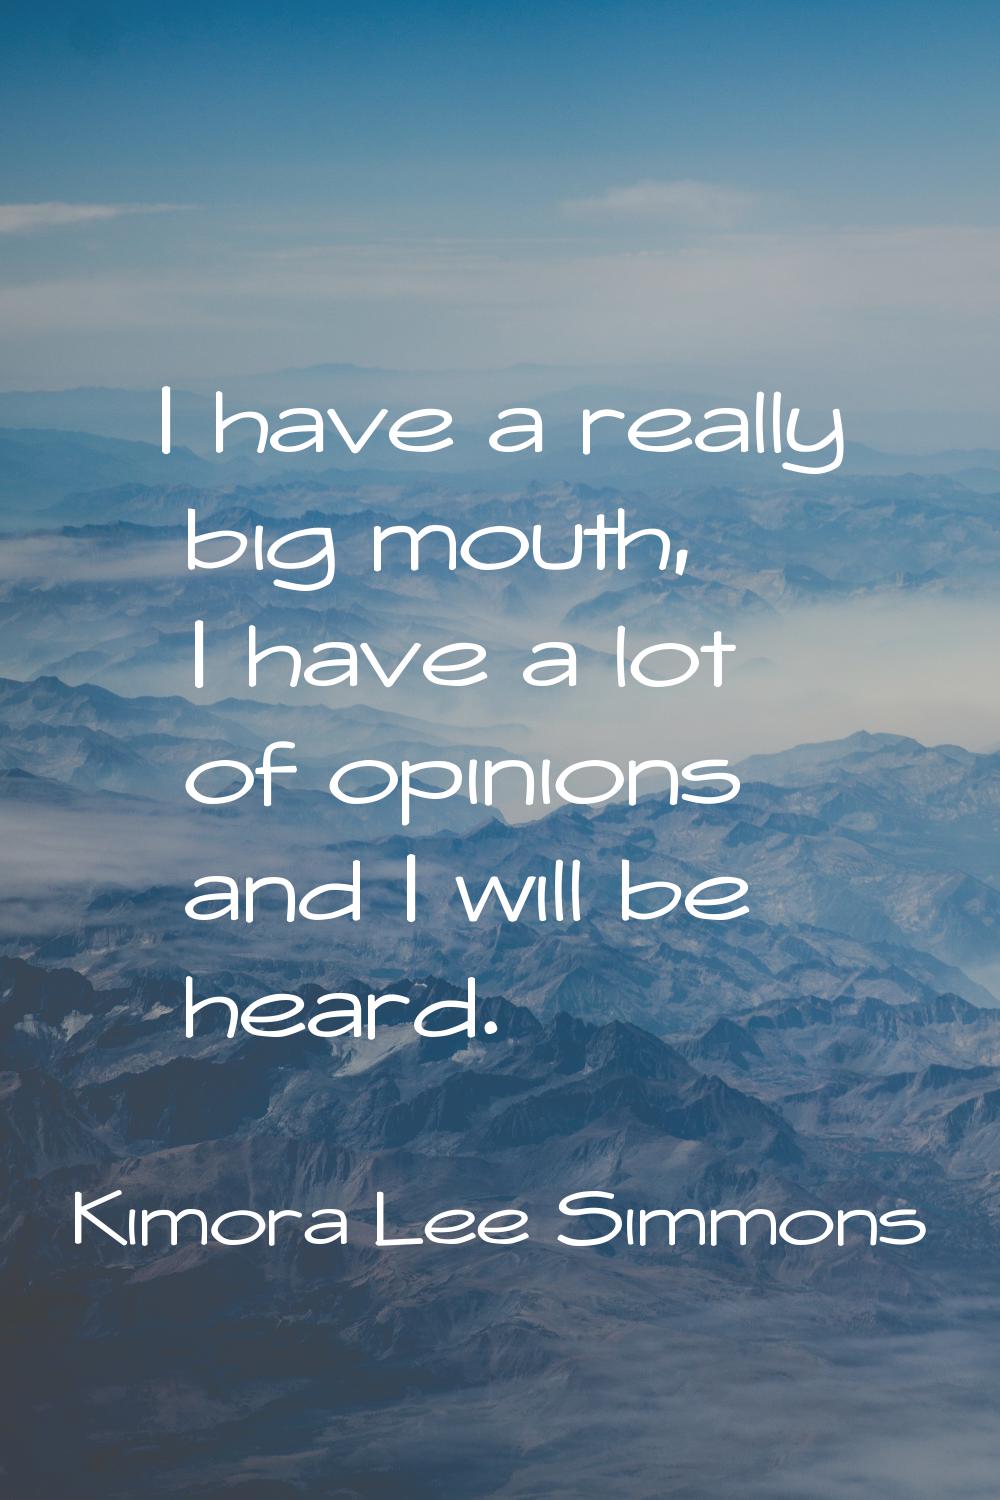 I have a really big mouth, I have a lot of opinions and I will be heard.